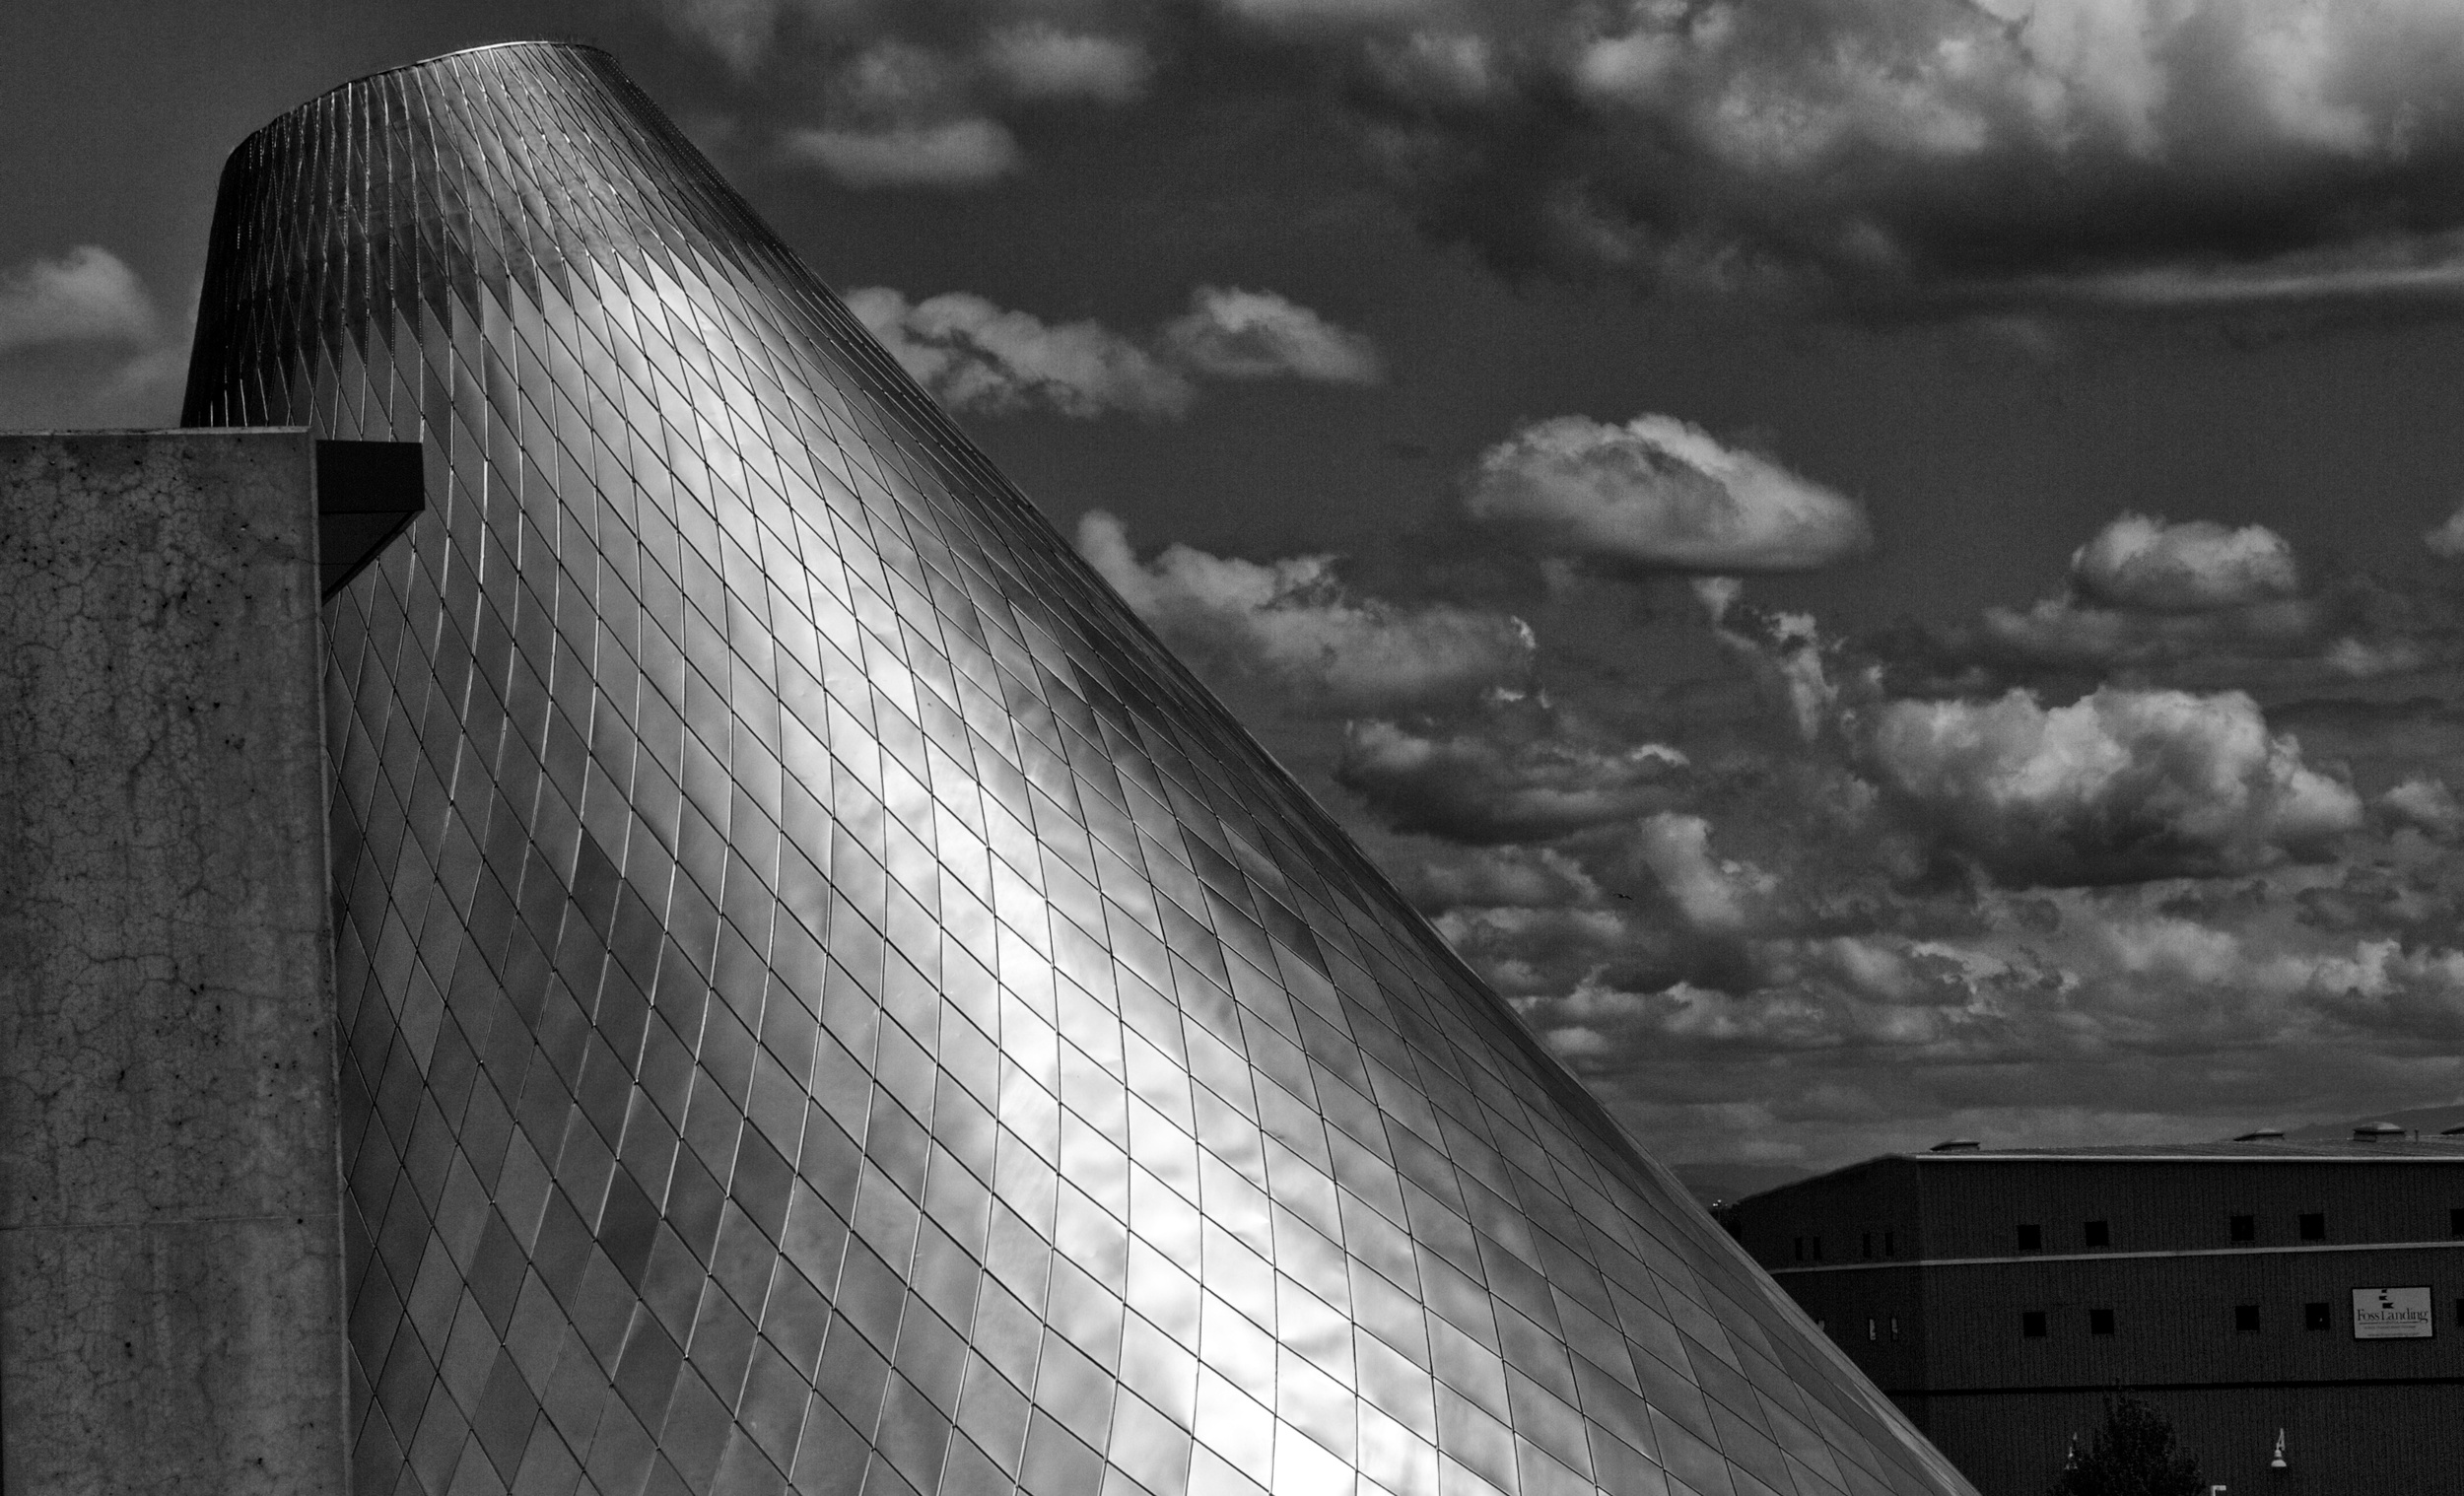 2014-05-17 at 14-21-23 Architecture, Modern, Museum of Glass, Steel, Tacoma, Urban.jpg